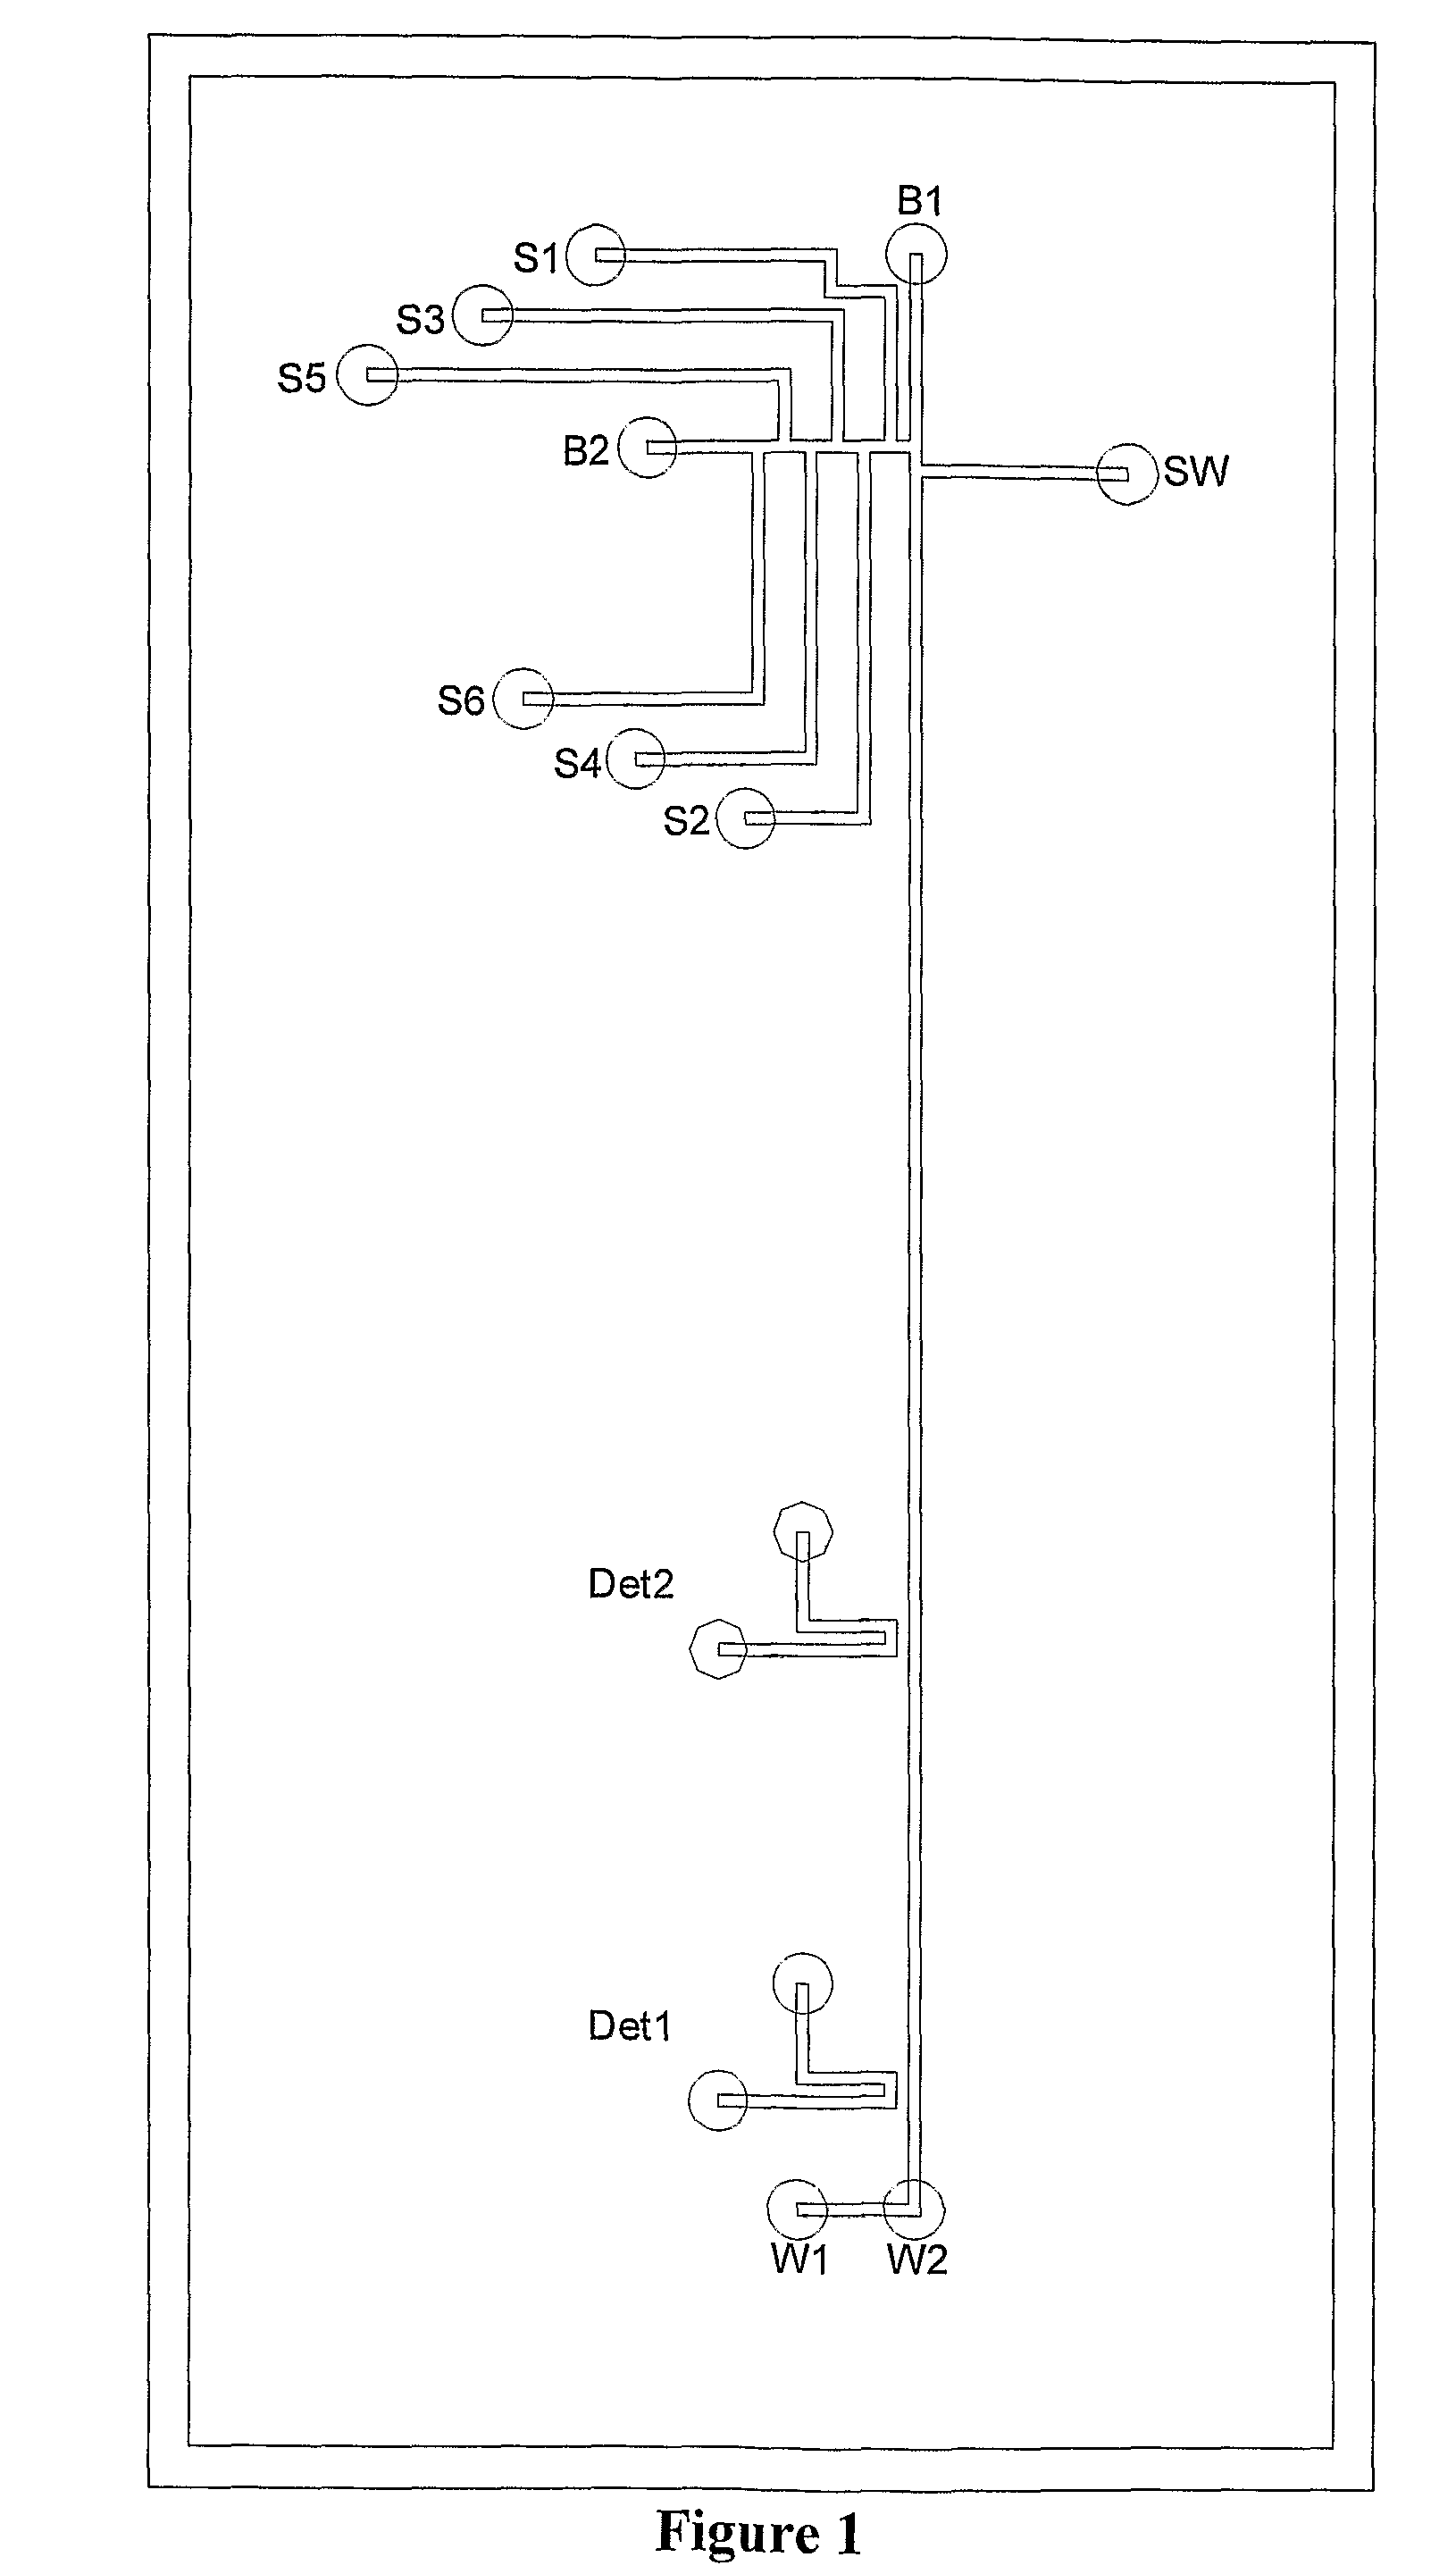 Multi-channel capillary electrophoresis microchips and uses thereof